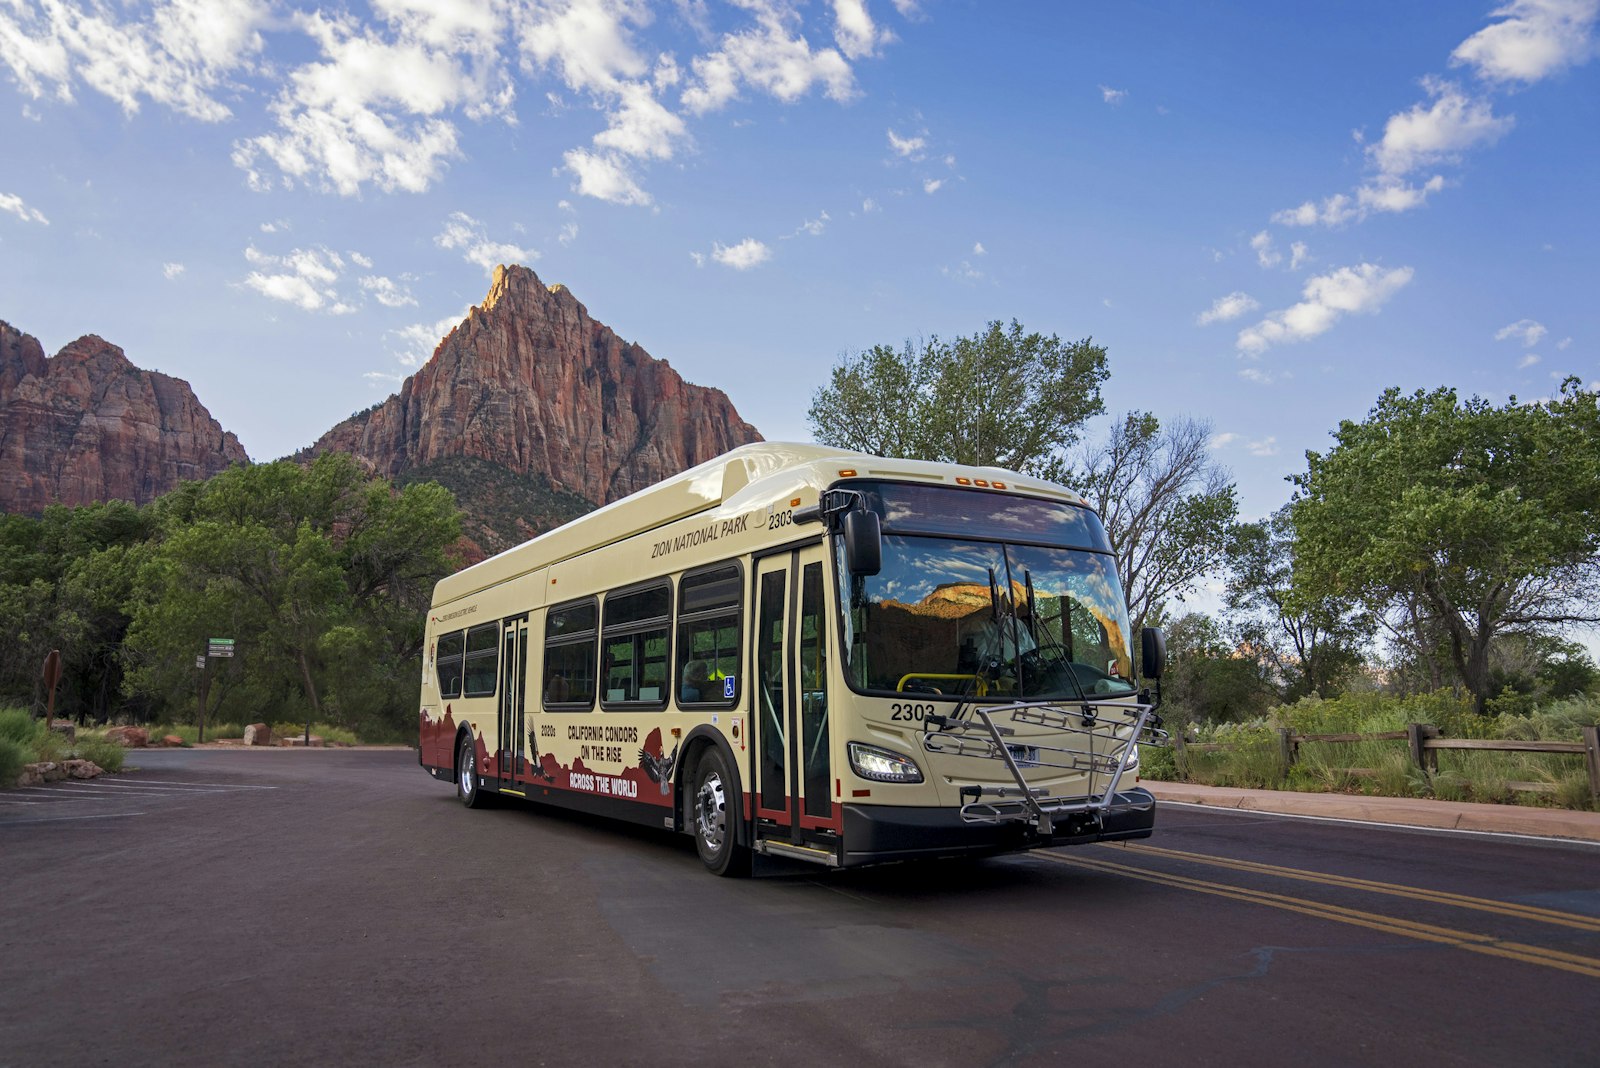 A beige shuttle bus on a dark asphalt road in front of a large, triangular sandstone mountain.